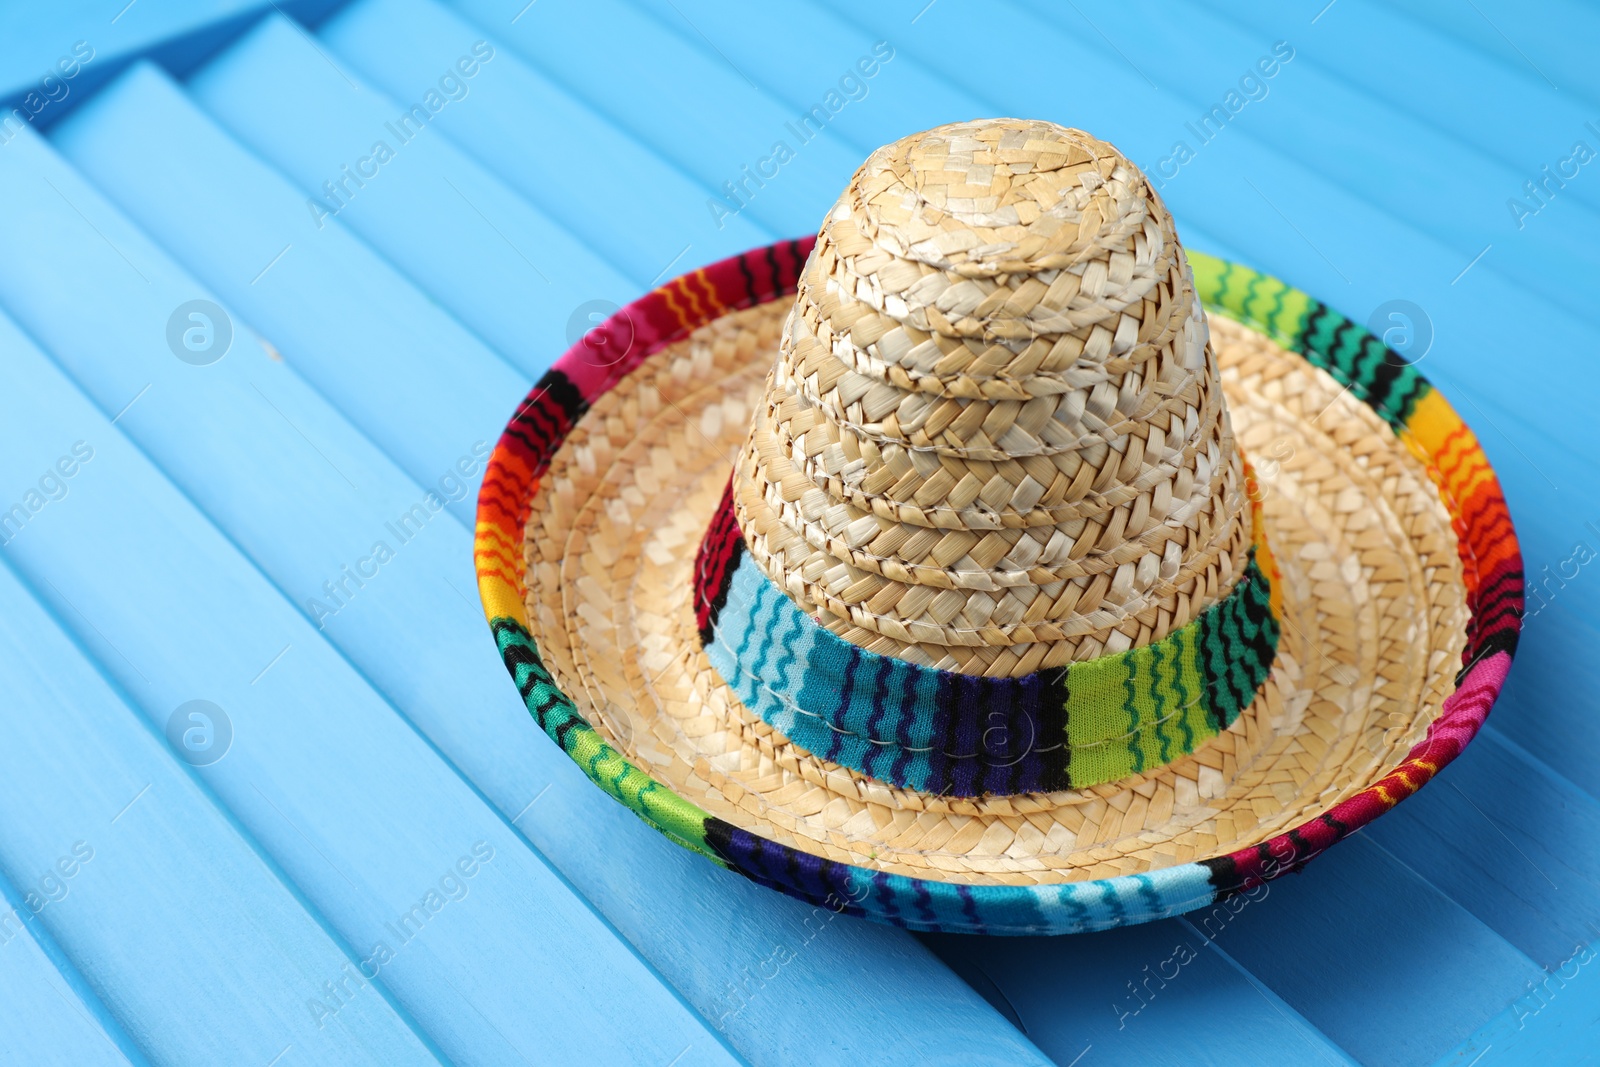 Photo of Mexican sombrero hat on blue wooden surface. Space for text